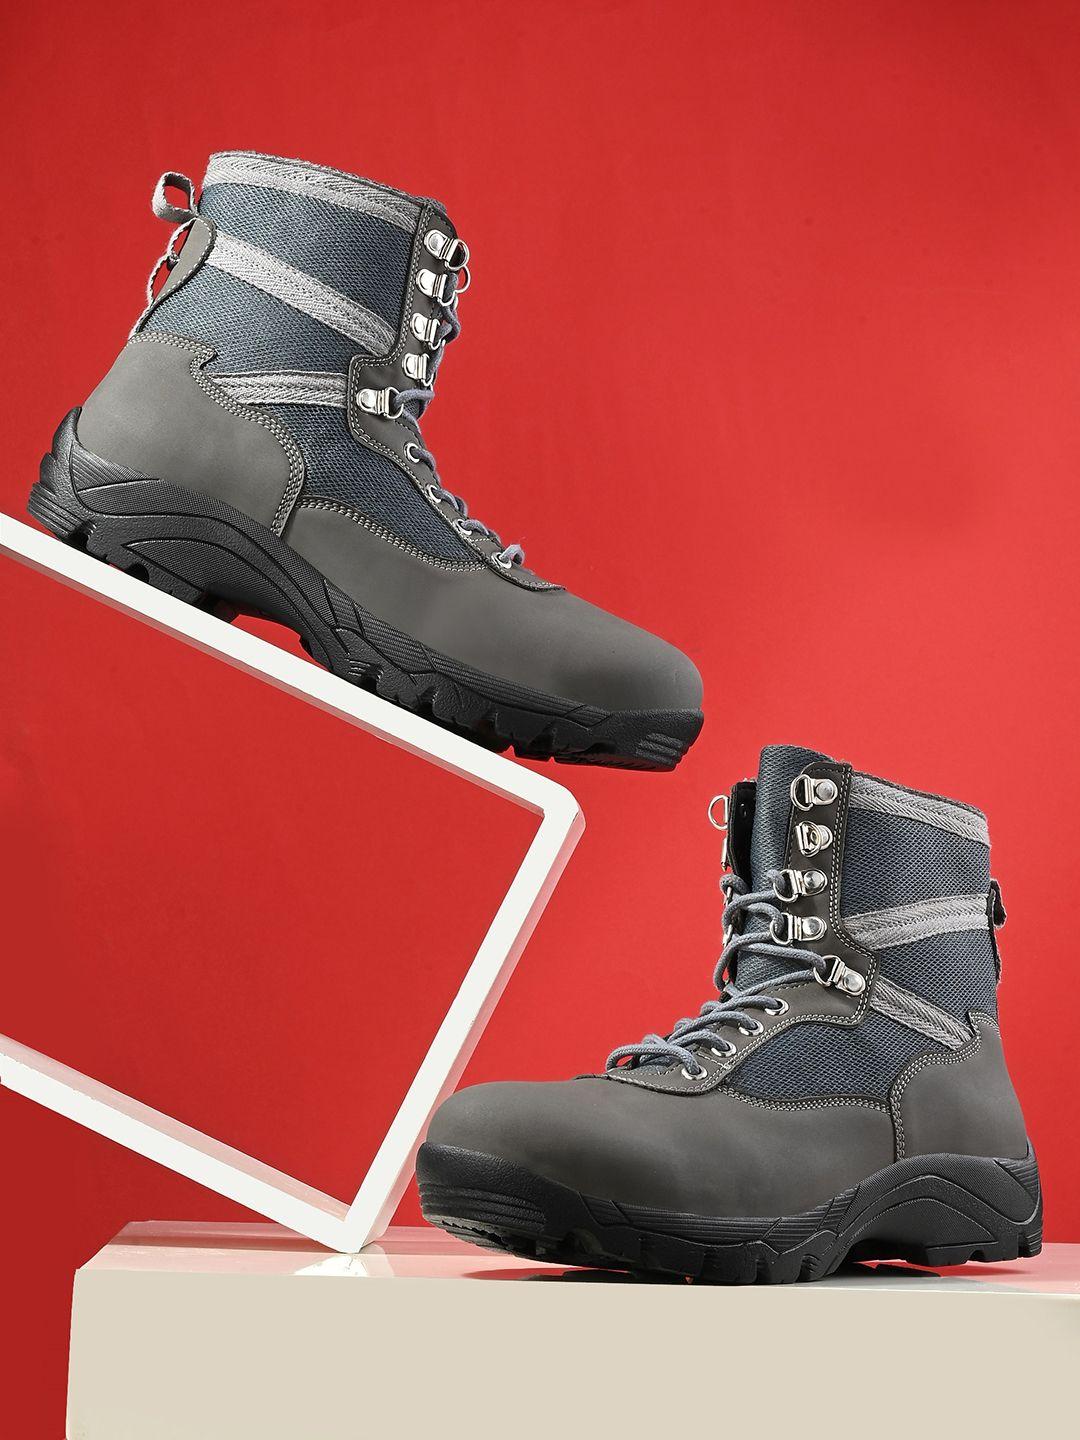 the-roadster-lifestyle-co.-men-high-top-biker-boots